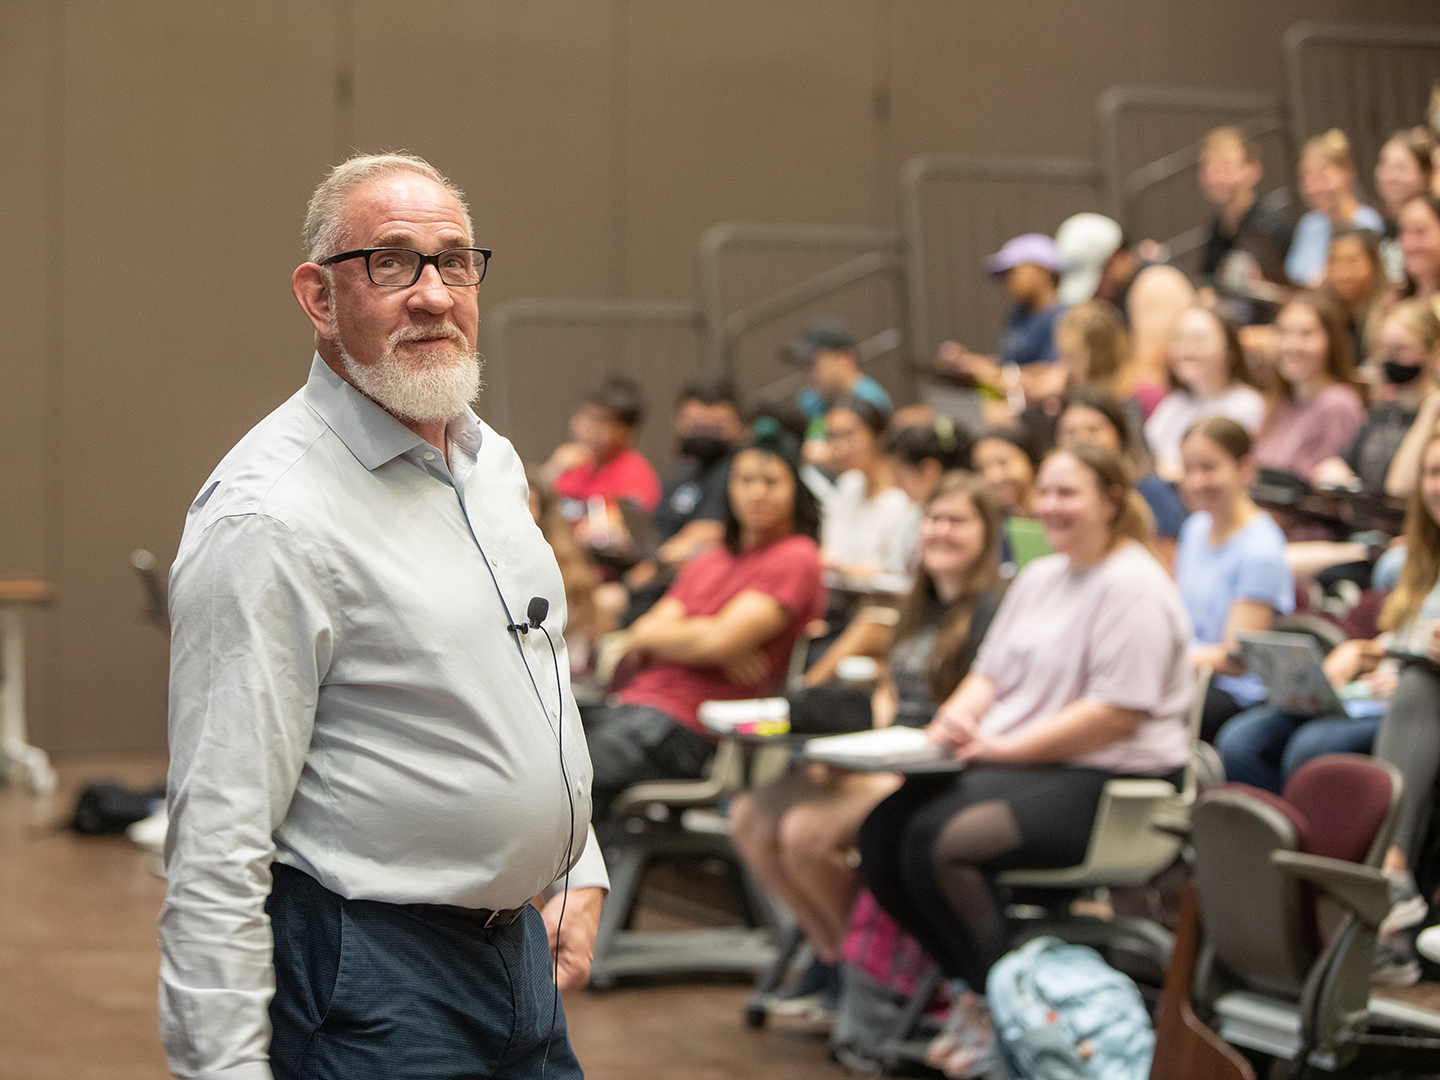 Dr. James Herman in front of a classroom full of students